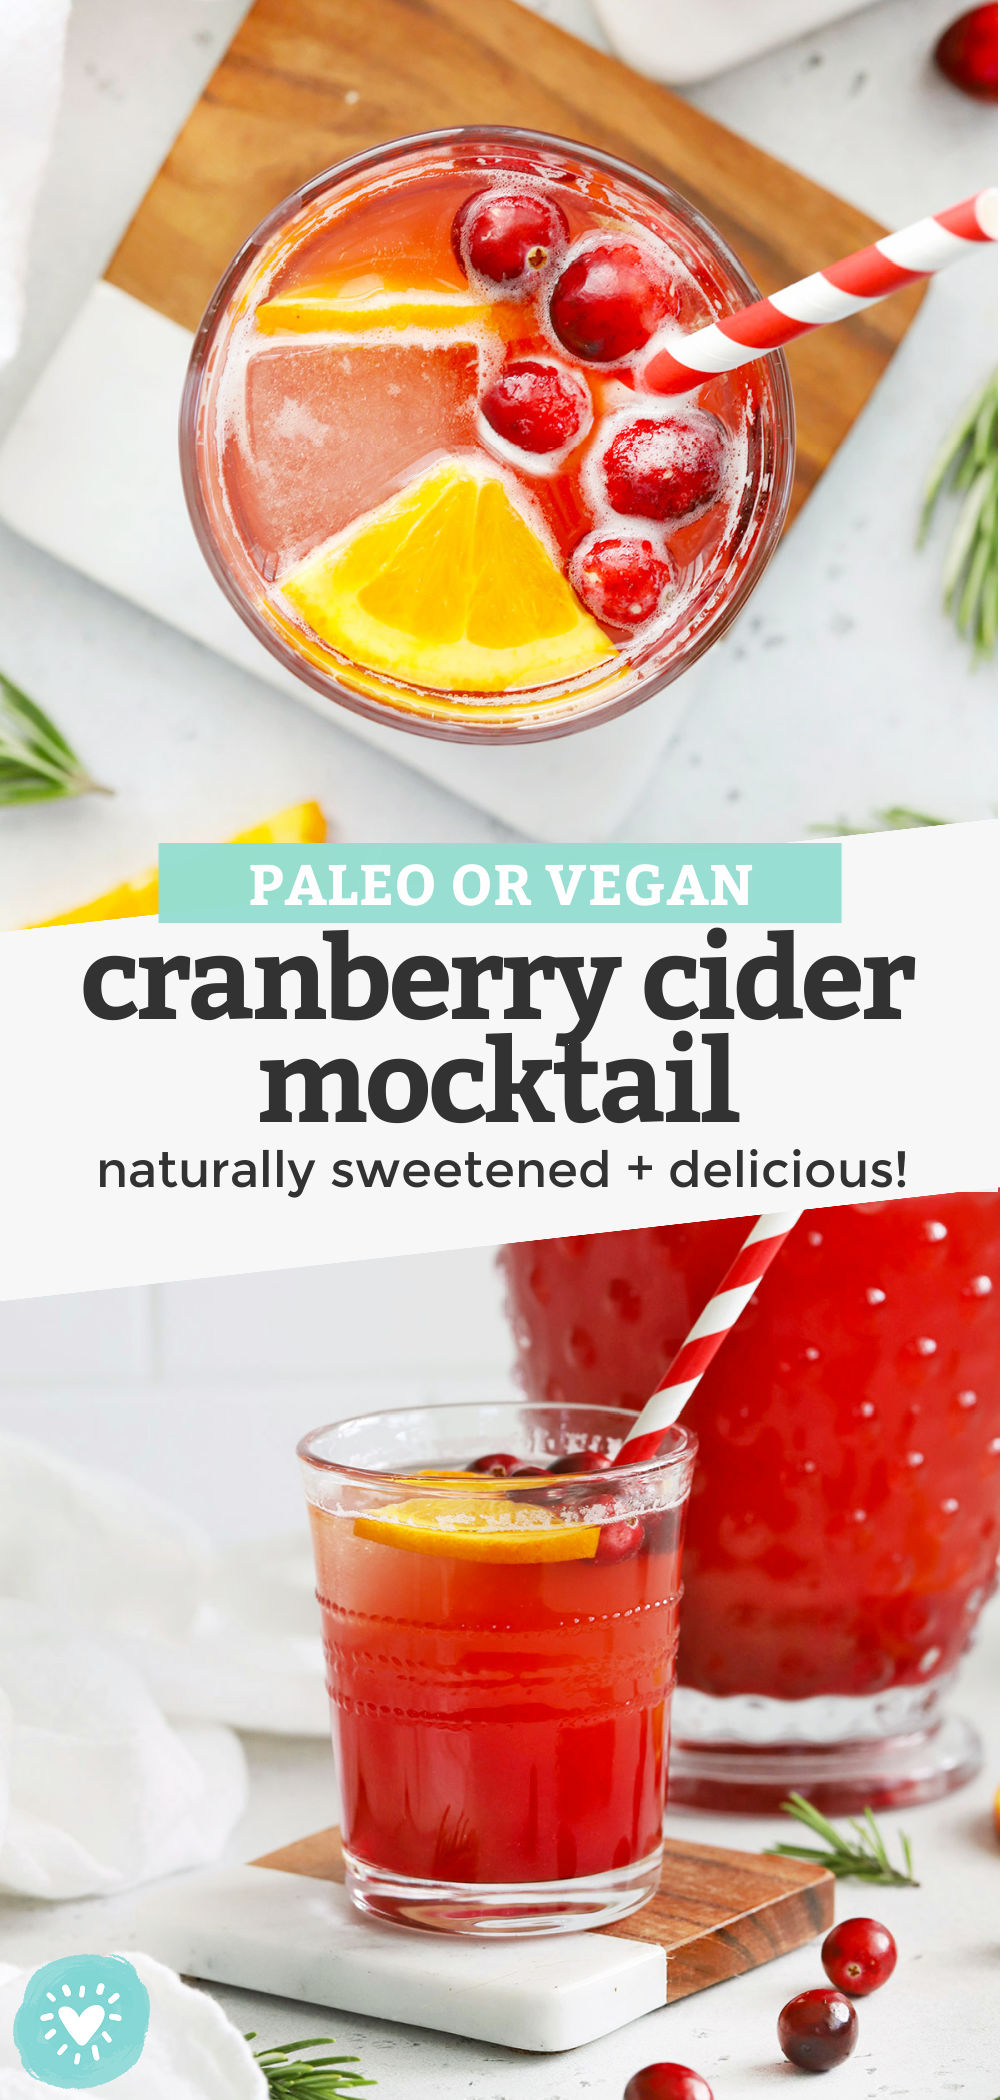 Cranberry Cider Mocktail - This naturally-sweetened fall mocktail recipe is perfect for your holiday table or holiday parties! Make just one or two glasses, or a whole pitcher to enjoy! (Paleo + Vegan) // Paleo Mocktail // Non Alcoholic Cranberry Cider Mocktail // Non Alcoholic Cocktail // Cider Mocktail // Cranberry Mocktail // Fall Mocktail // Non Alcoholic Party Drink #thanskgiving #mocktail #paleo #vegan #cranberries